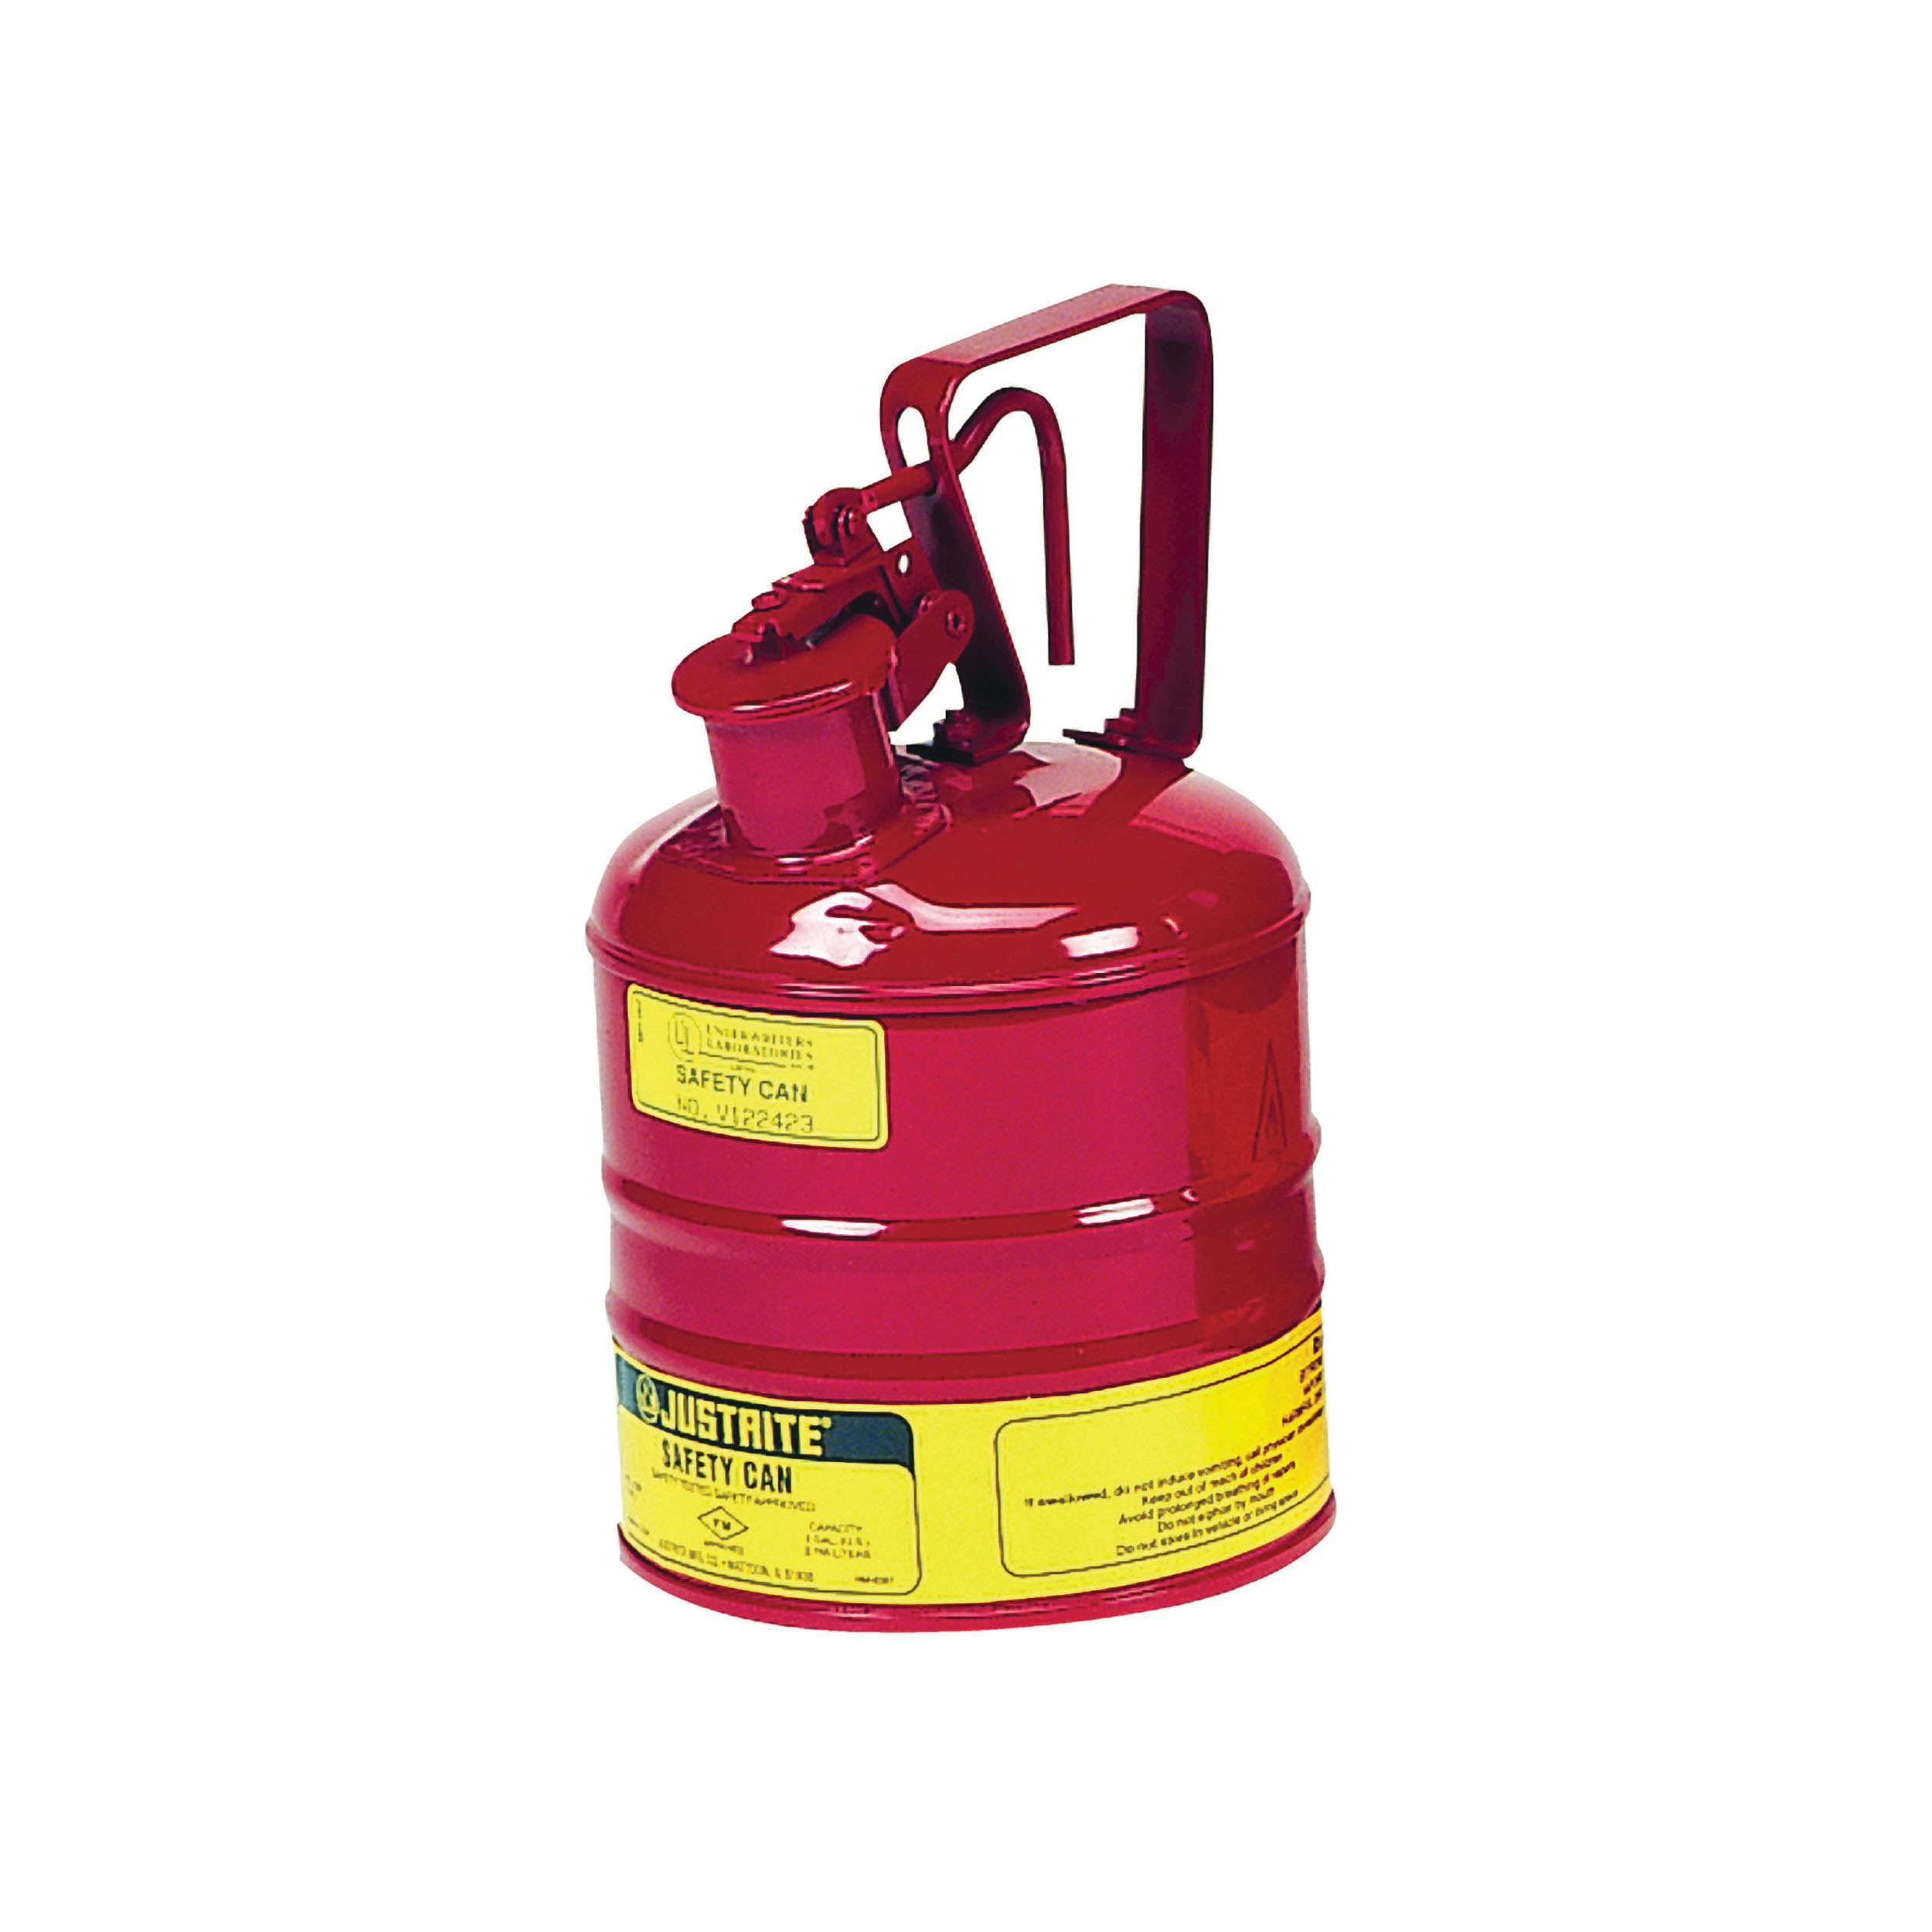 JUSTRITE 10301 Type I Safety Can,1 gal.,Red,11-1/2In H 